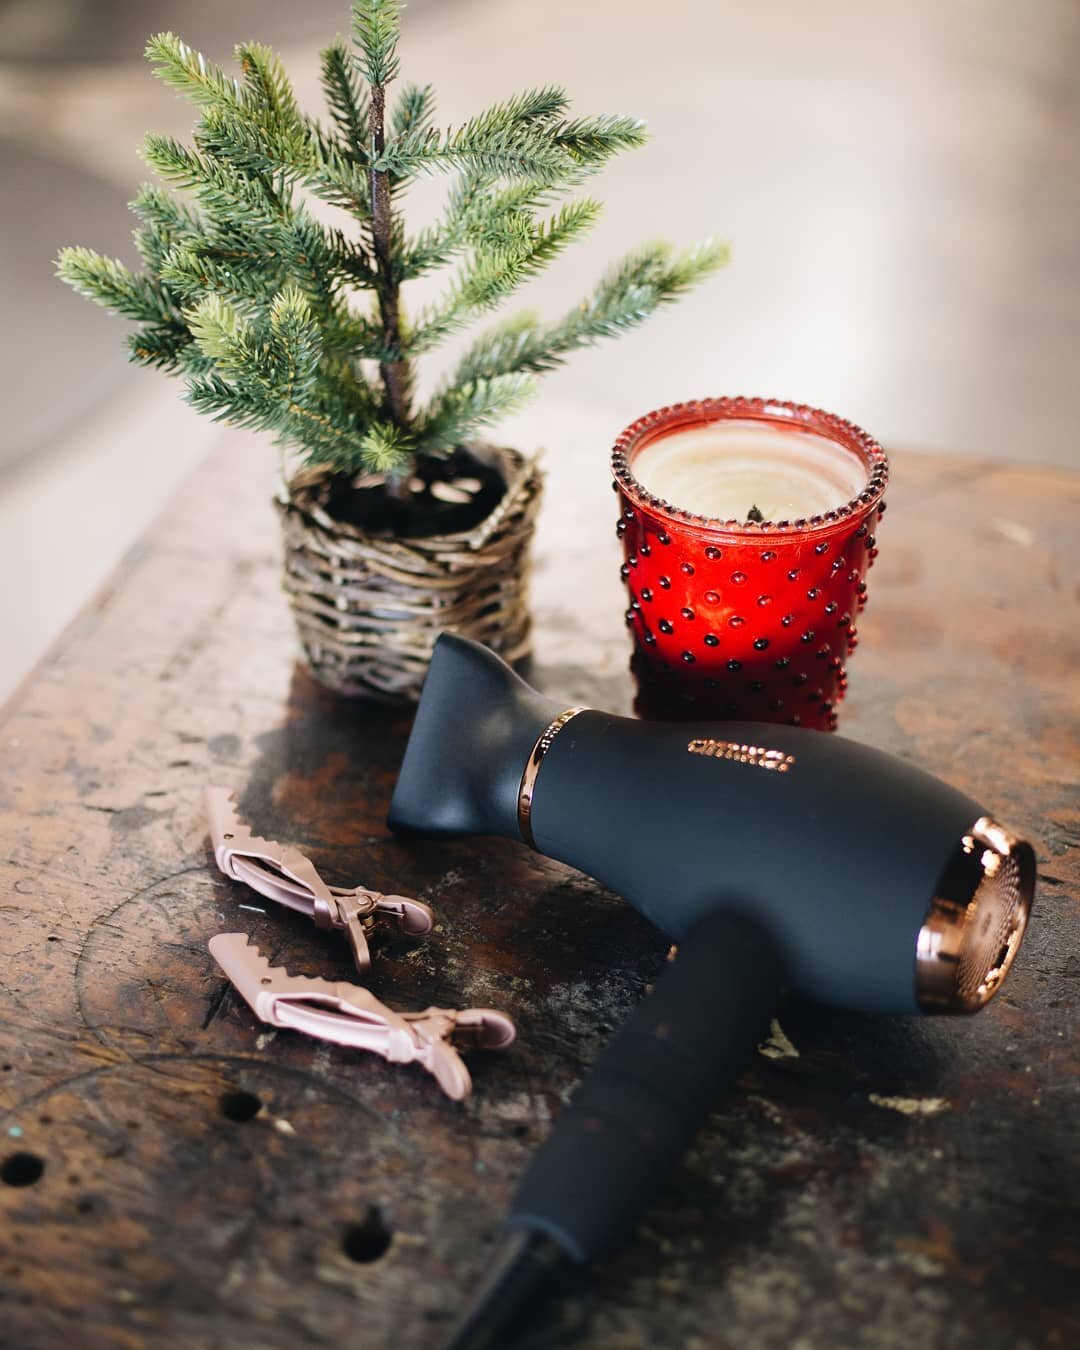 We still have a few remaining reservations for Christmas Eve Blow Outs! &amp; Makeup applications. Don't wait, book now. We will be taking reservations starting at 8AM &amp; the last reservation at 4 PM. 🎅🎄
.
#blowoutbeautyanddrybar #blowouts #blow